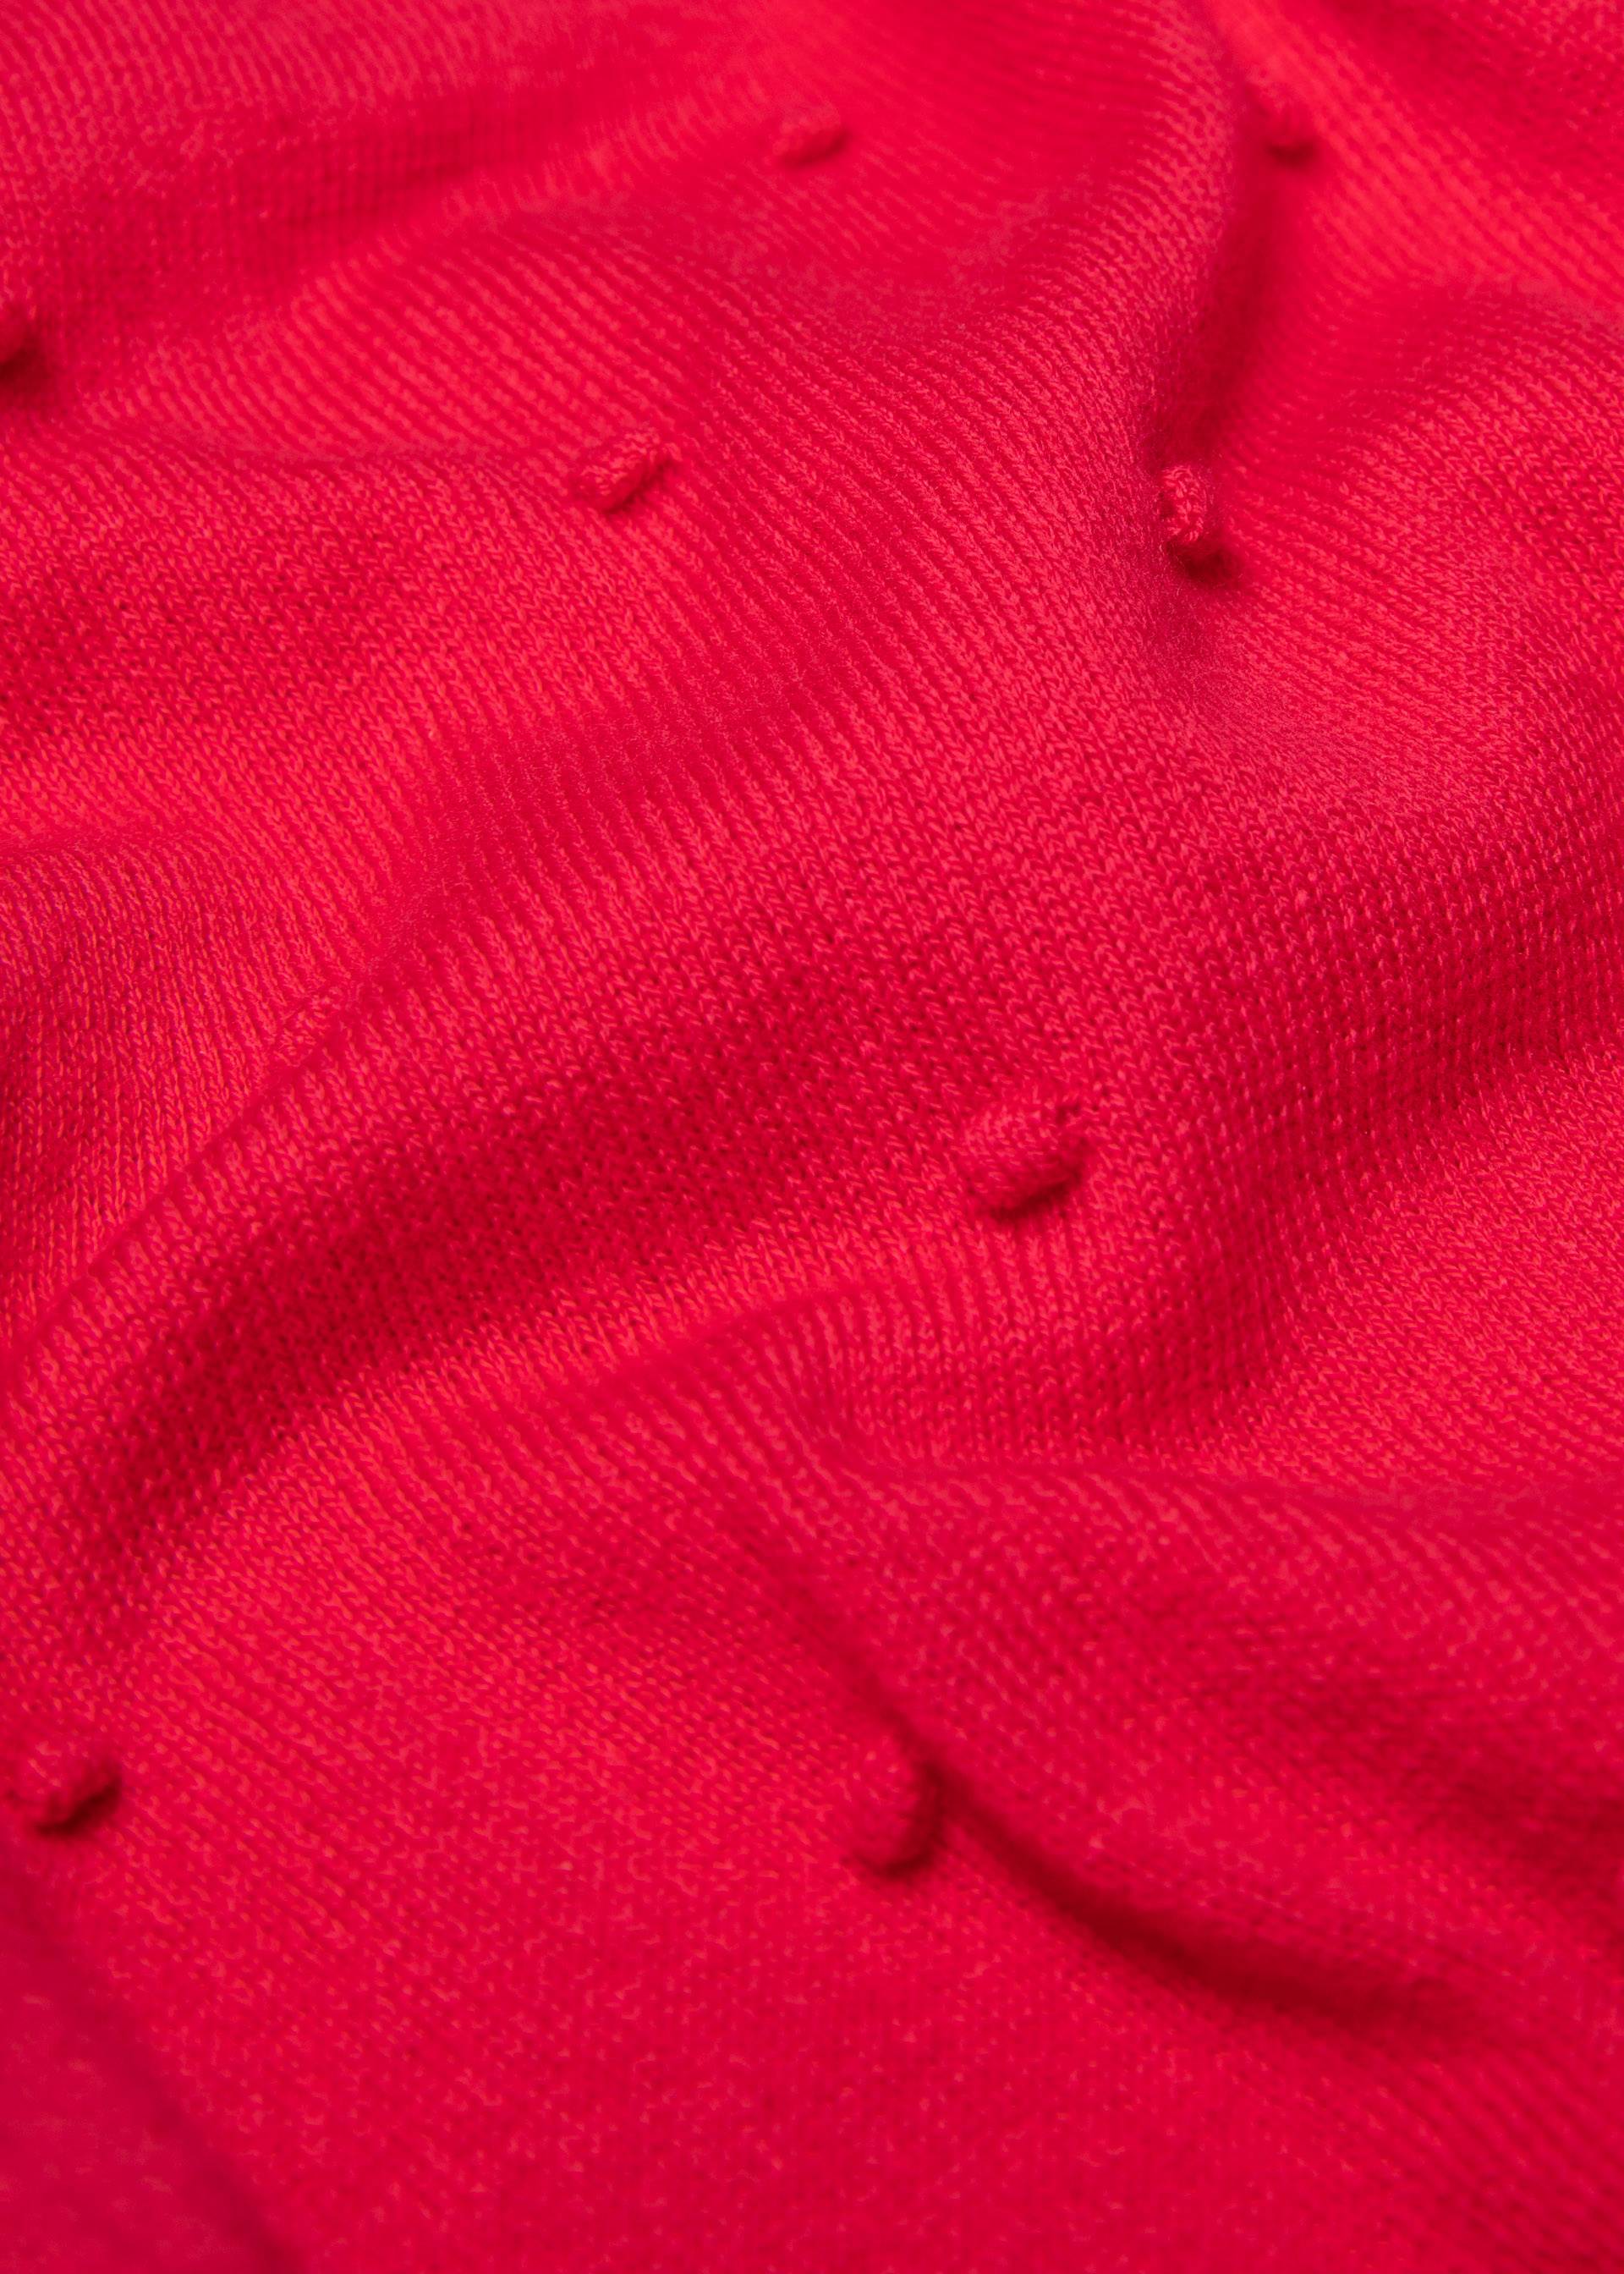 Cardigan Knot Hop, funny bugs red knit, Knitted Jumpers & Cardigans, Red